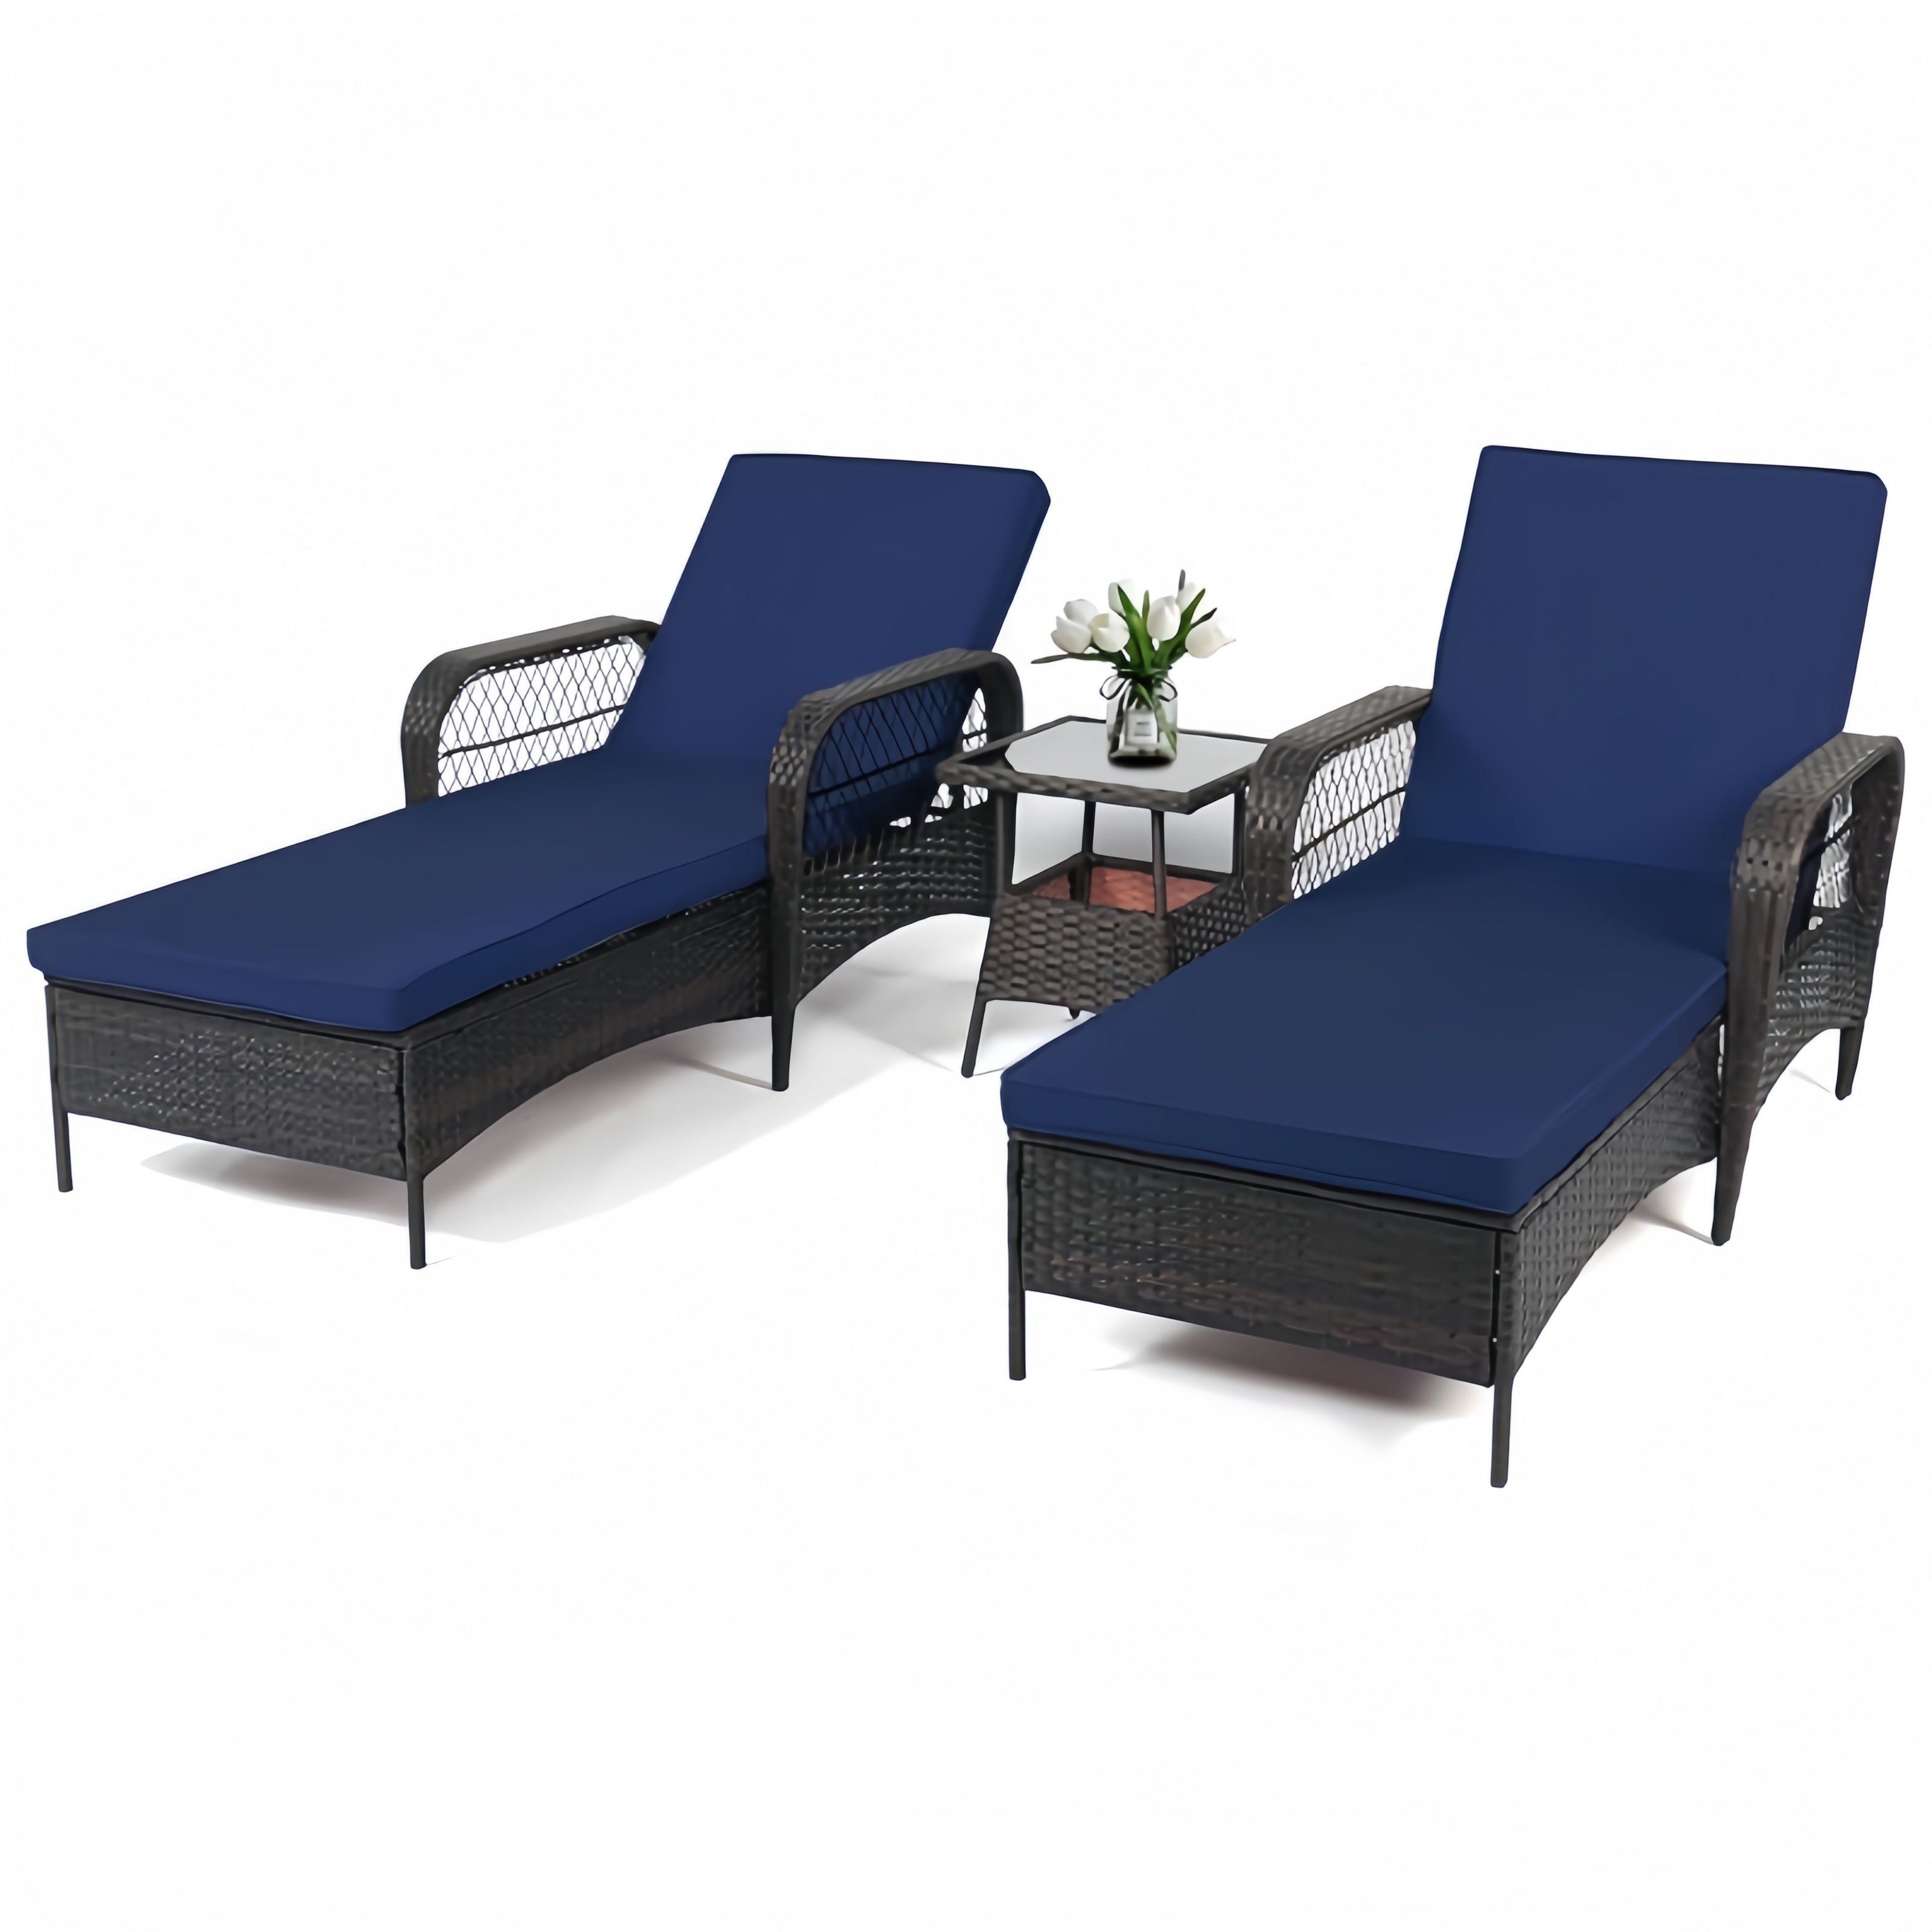 Rattan Outdoor Patio Lounge Chair with 6 Adjustable Positions, Armrests, and Padded Cushions